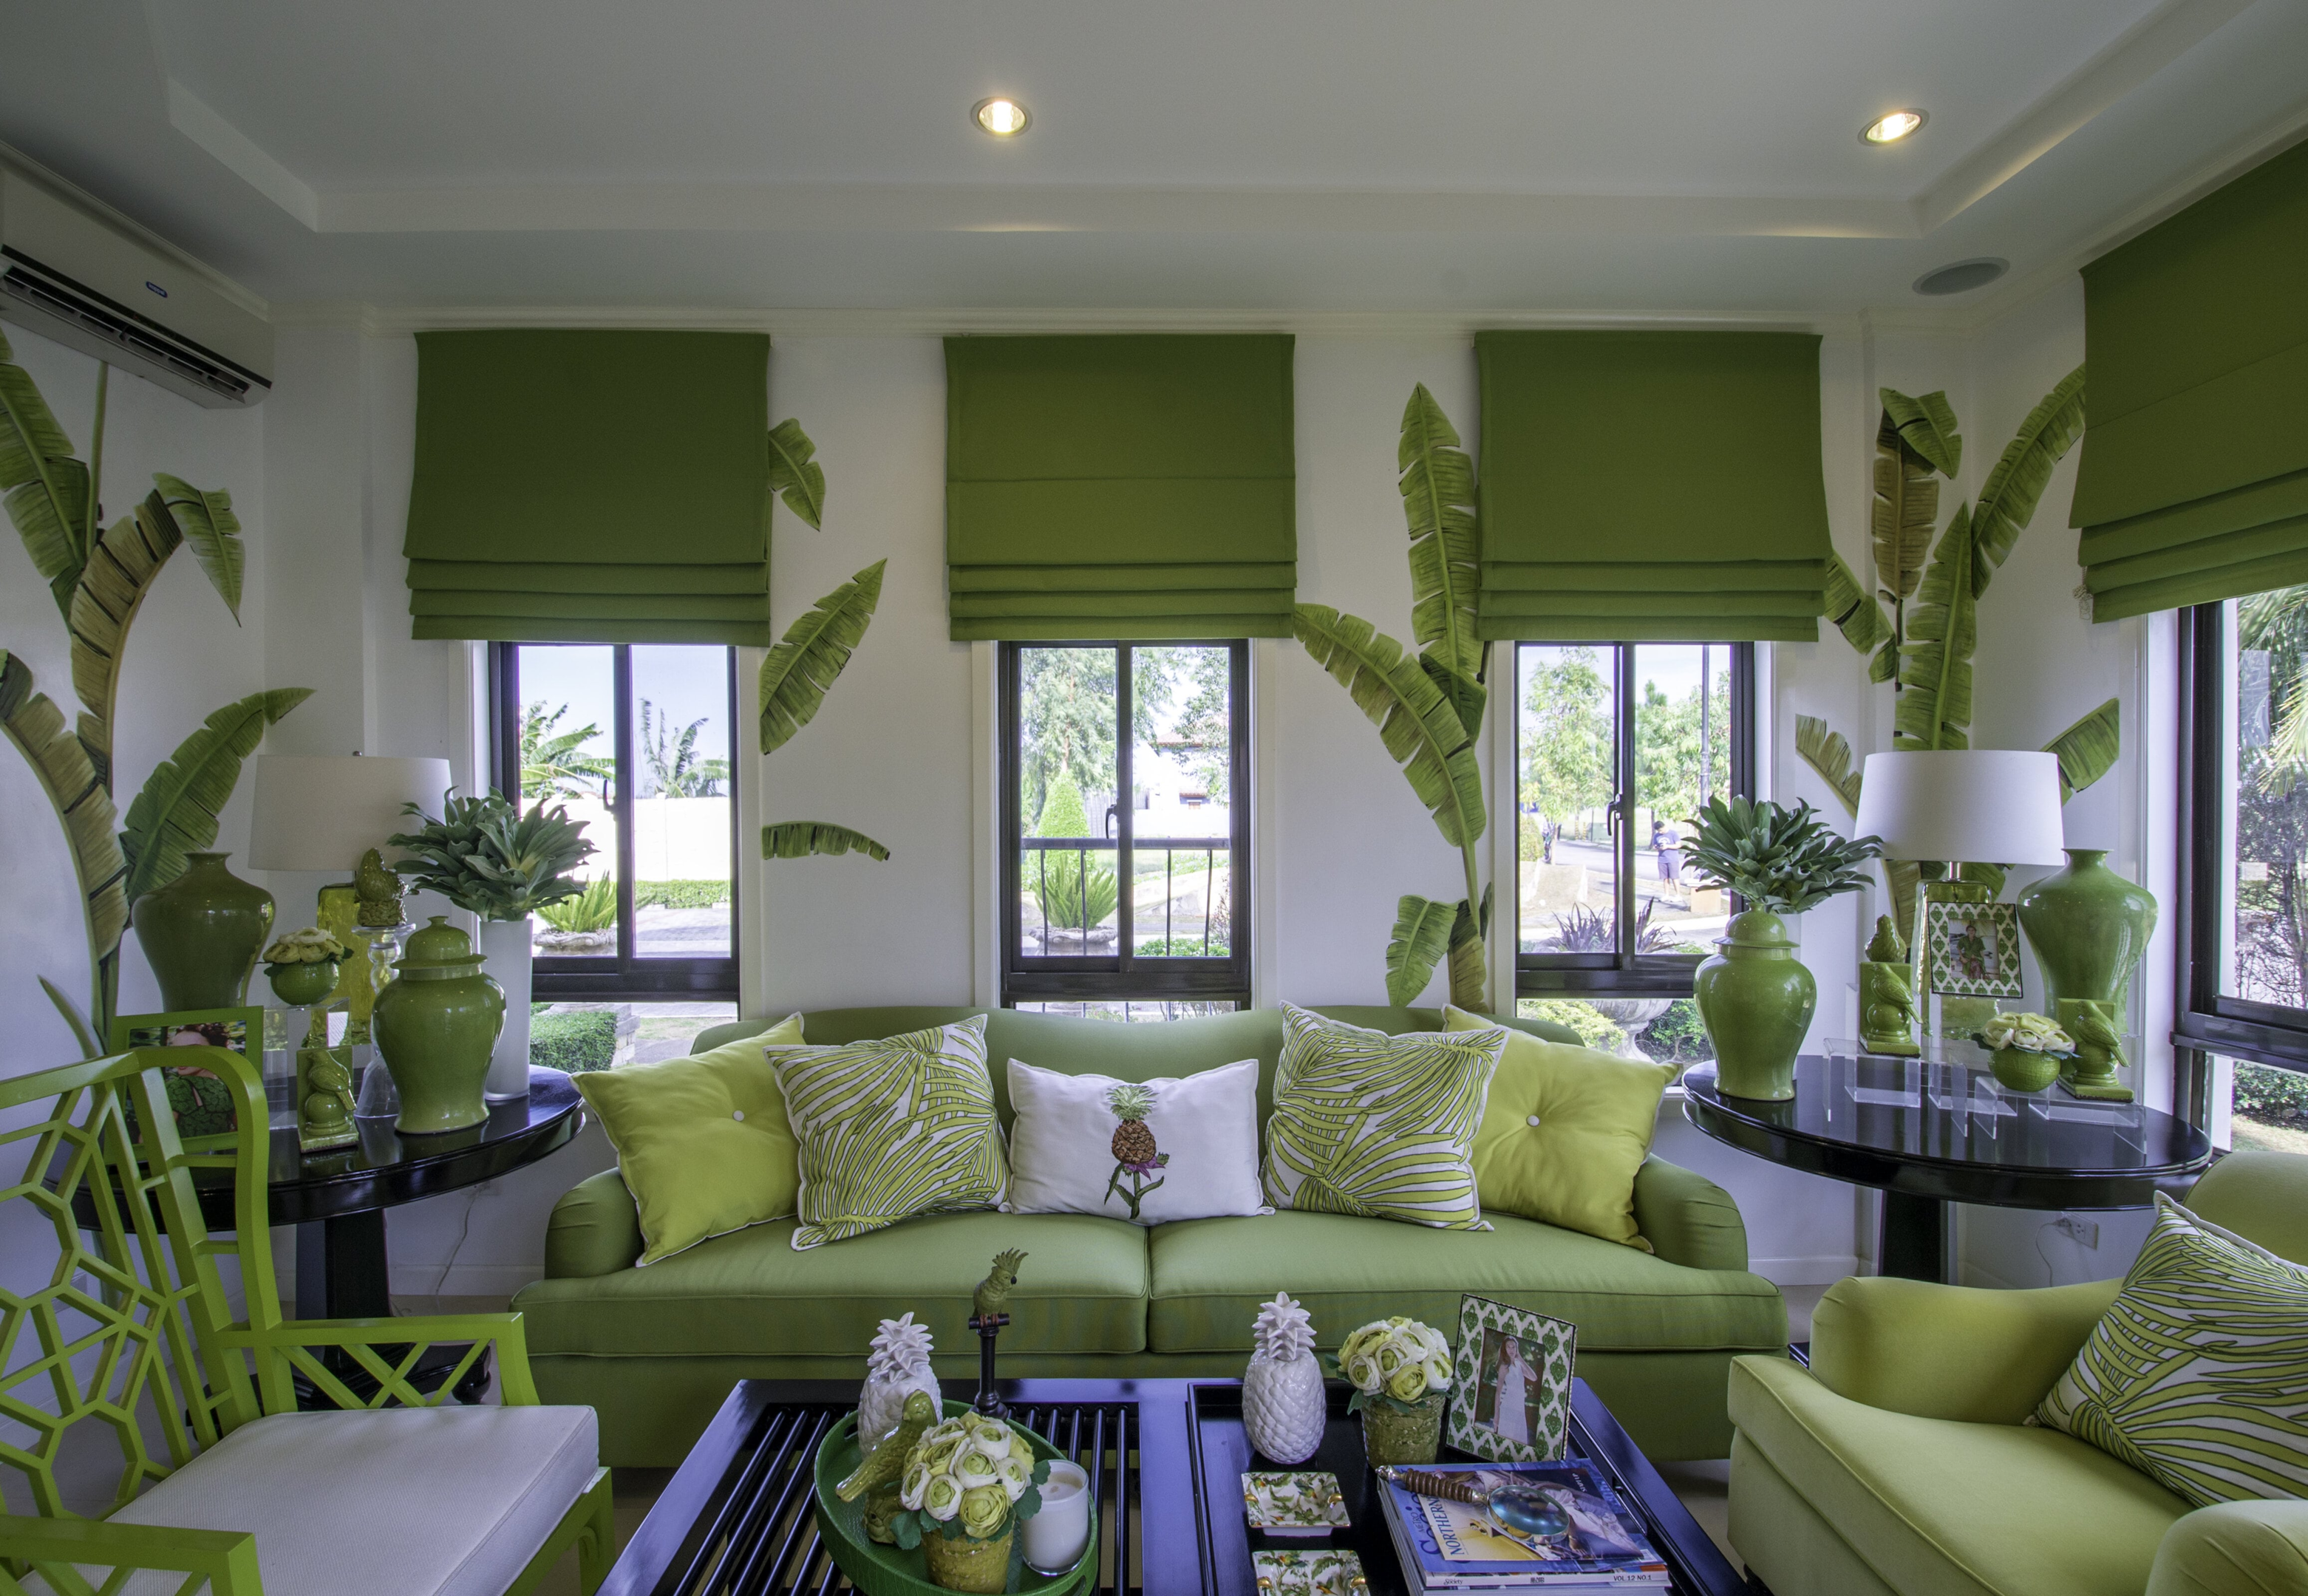 decorating with green, green room decorating ideas, ofw house design philippines, small house interior design ideas philippines, condo ideas interior